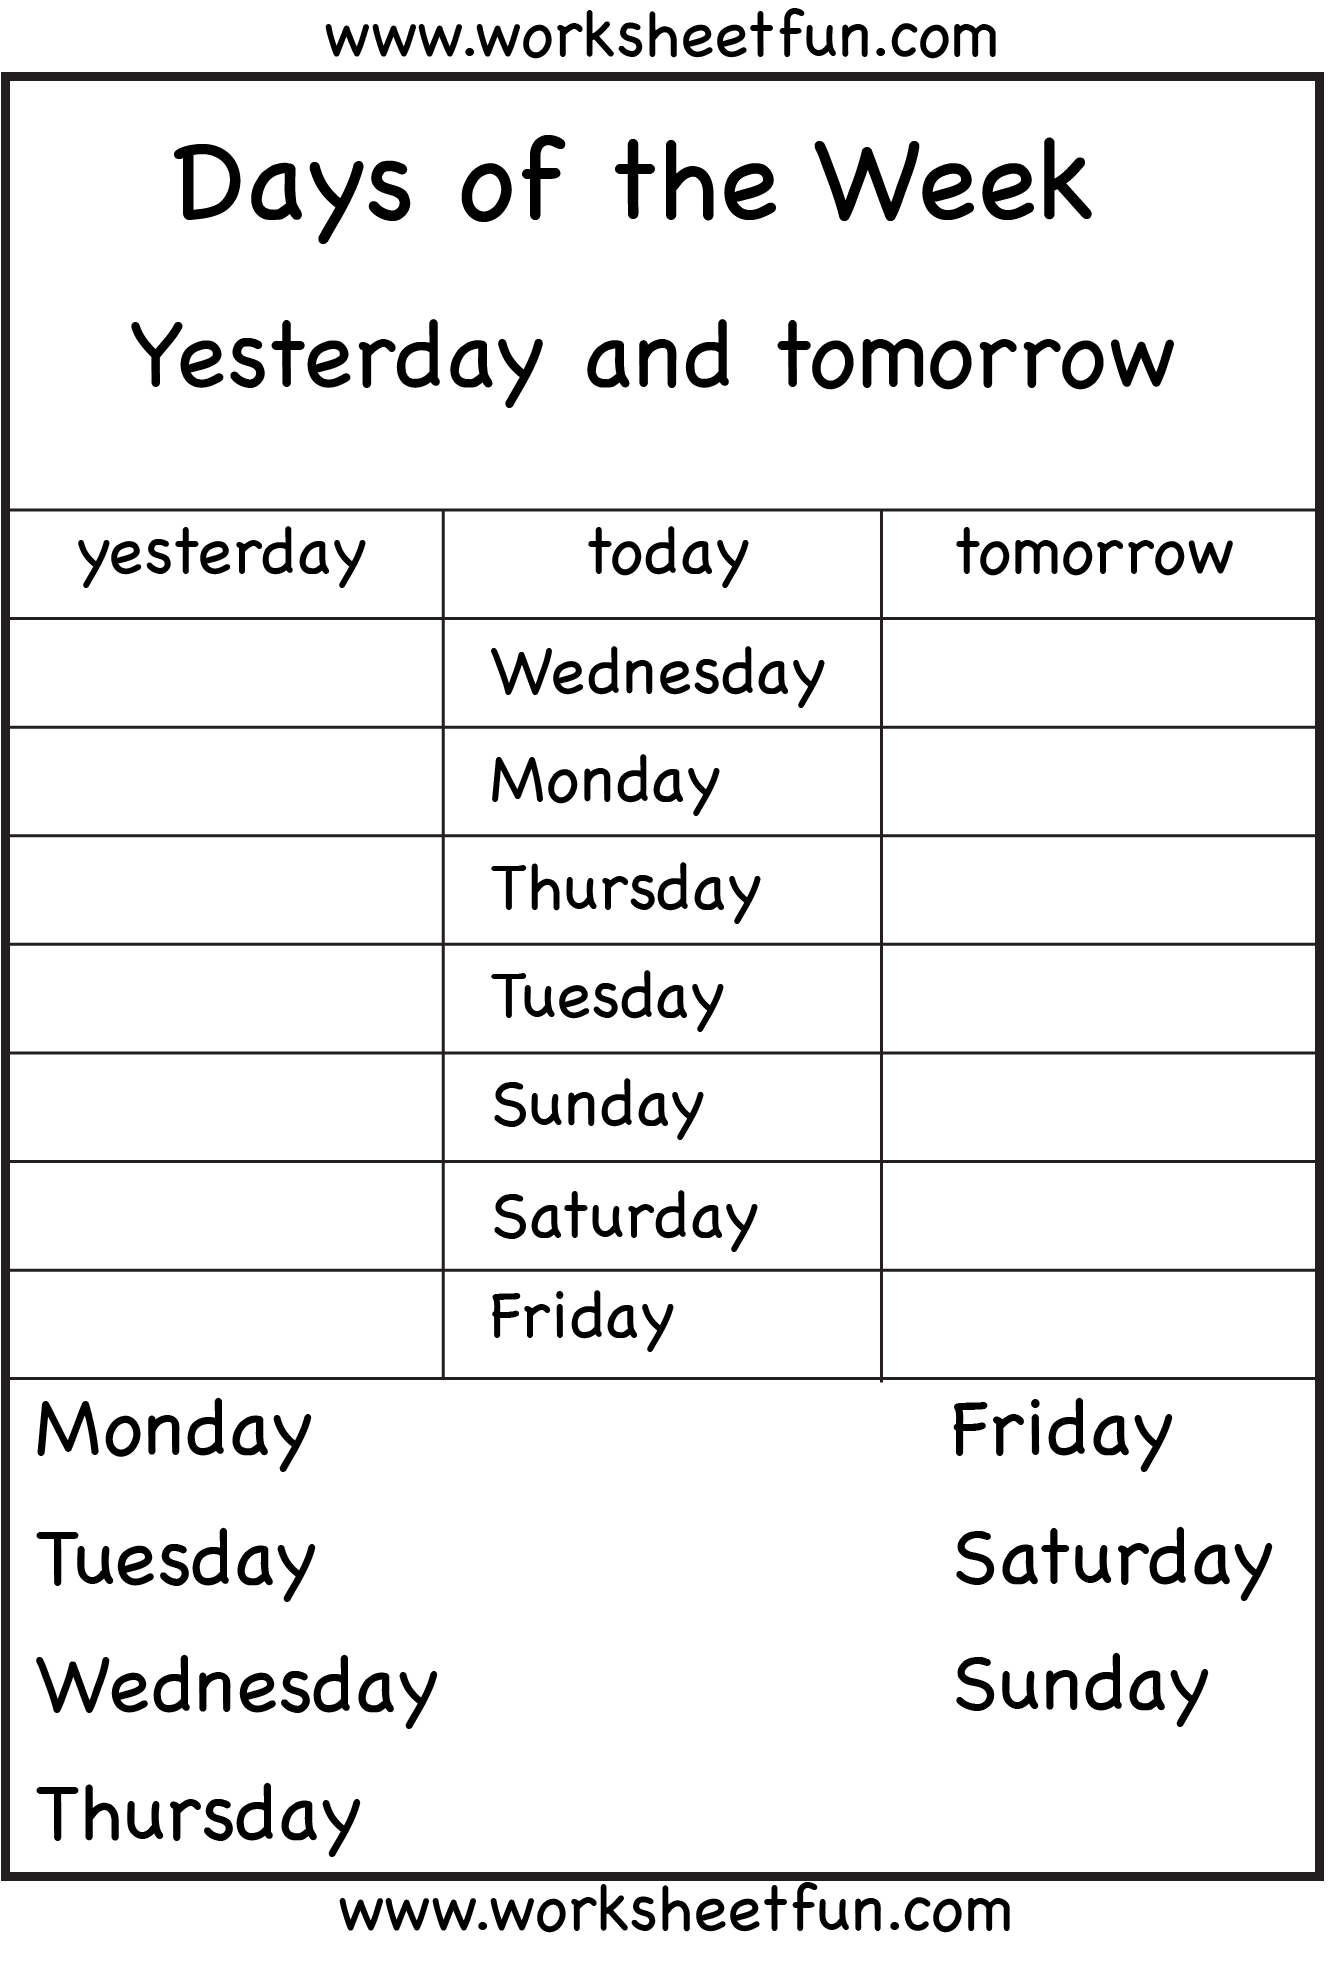 days-of-the-week-yesterday-and-tomorrow-6-worksheets-free